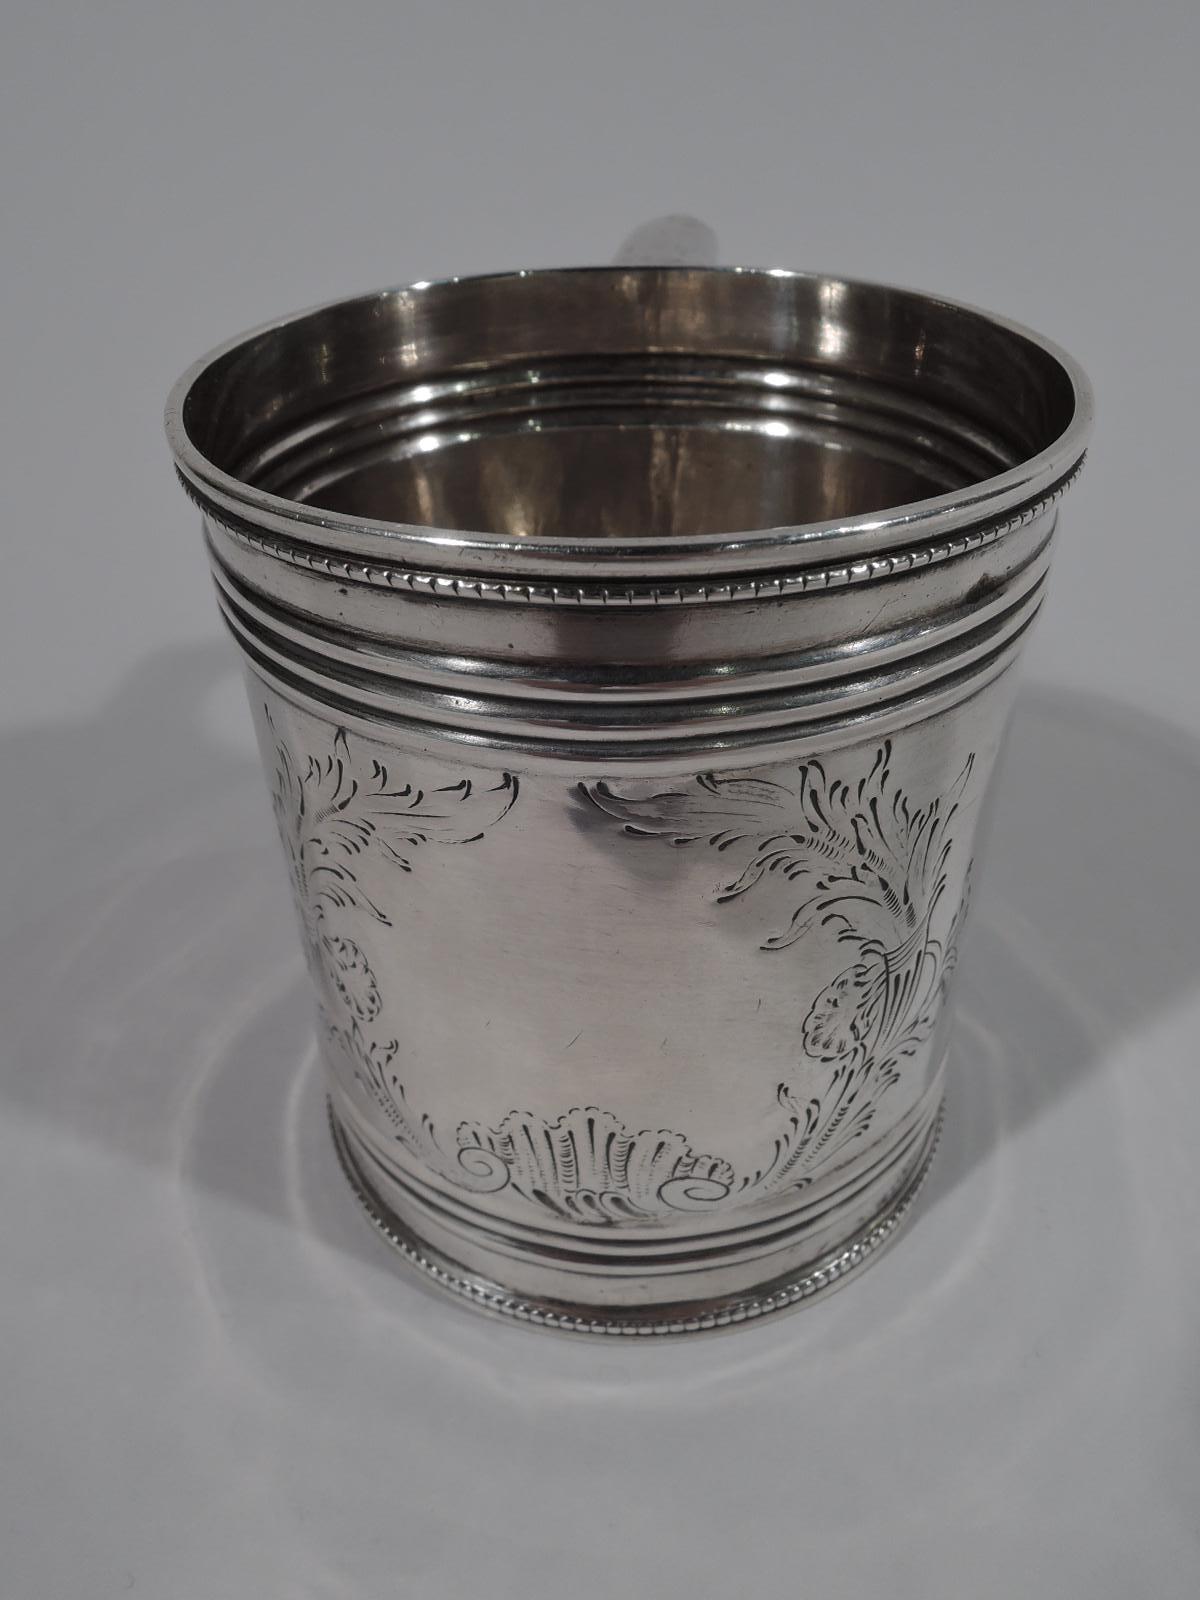 Classical coin silver baby cup, drum-form with ribbing and beading. Engraved quivers, flowers, and leaves forming cartouche (vacant). Scroll-bracket handle. Marked “G. W & H” for Gale, Woods & Hughes, a New York maker active circa 1833-1845. Weight: